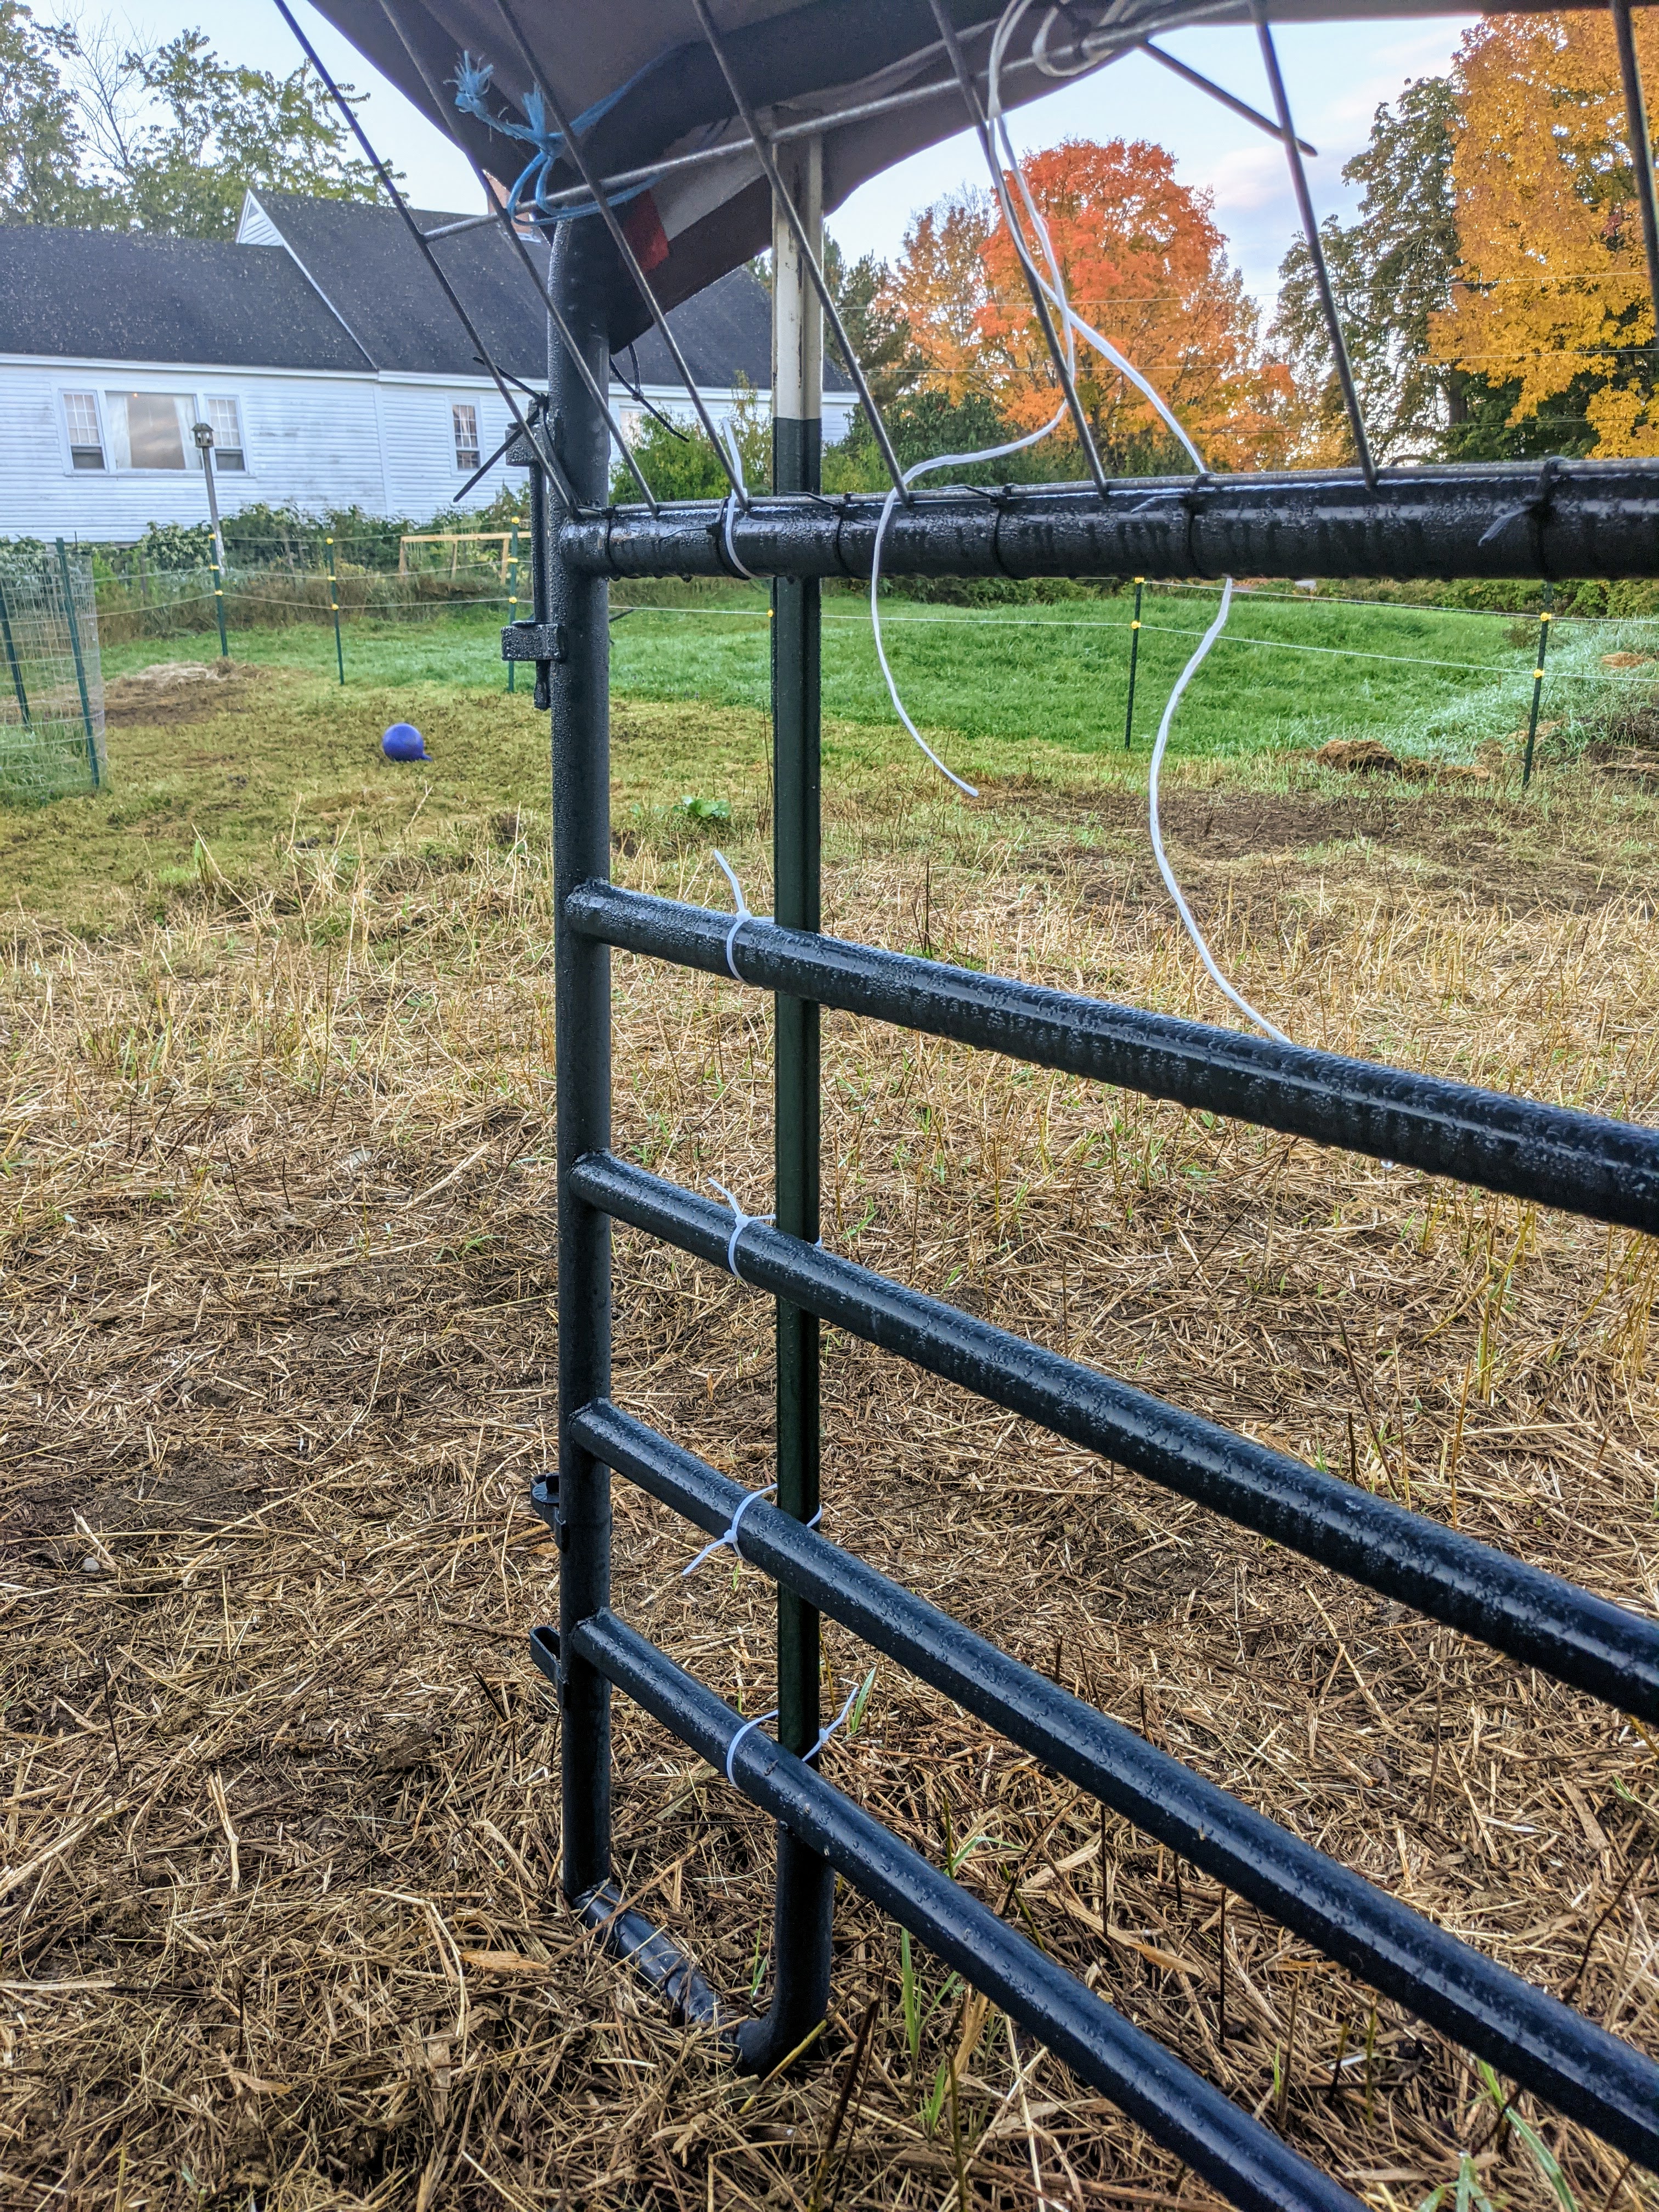 First corral panel is zip tied to a t-post for added security